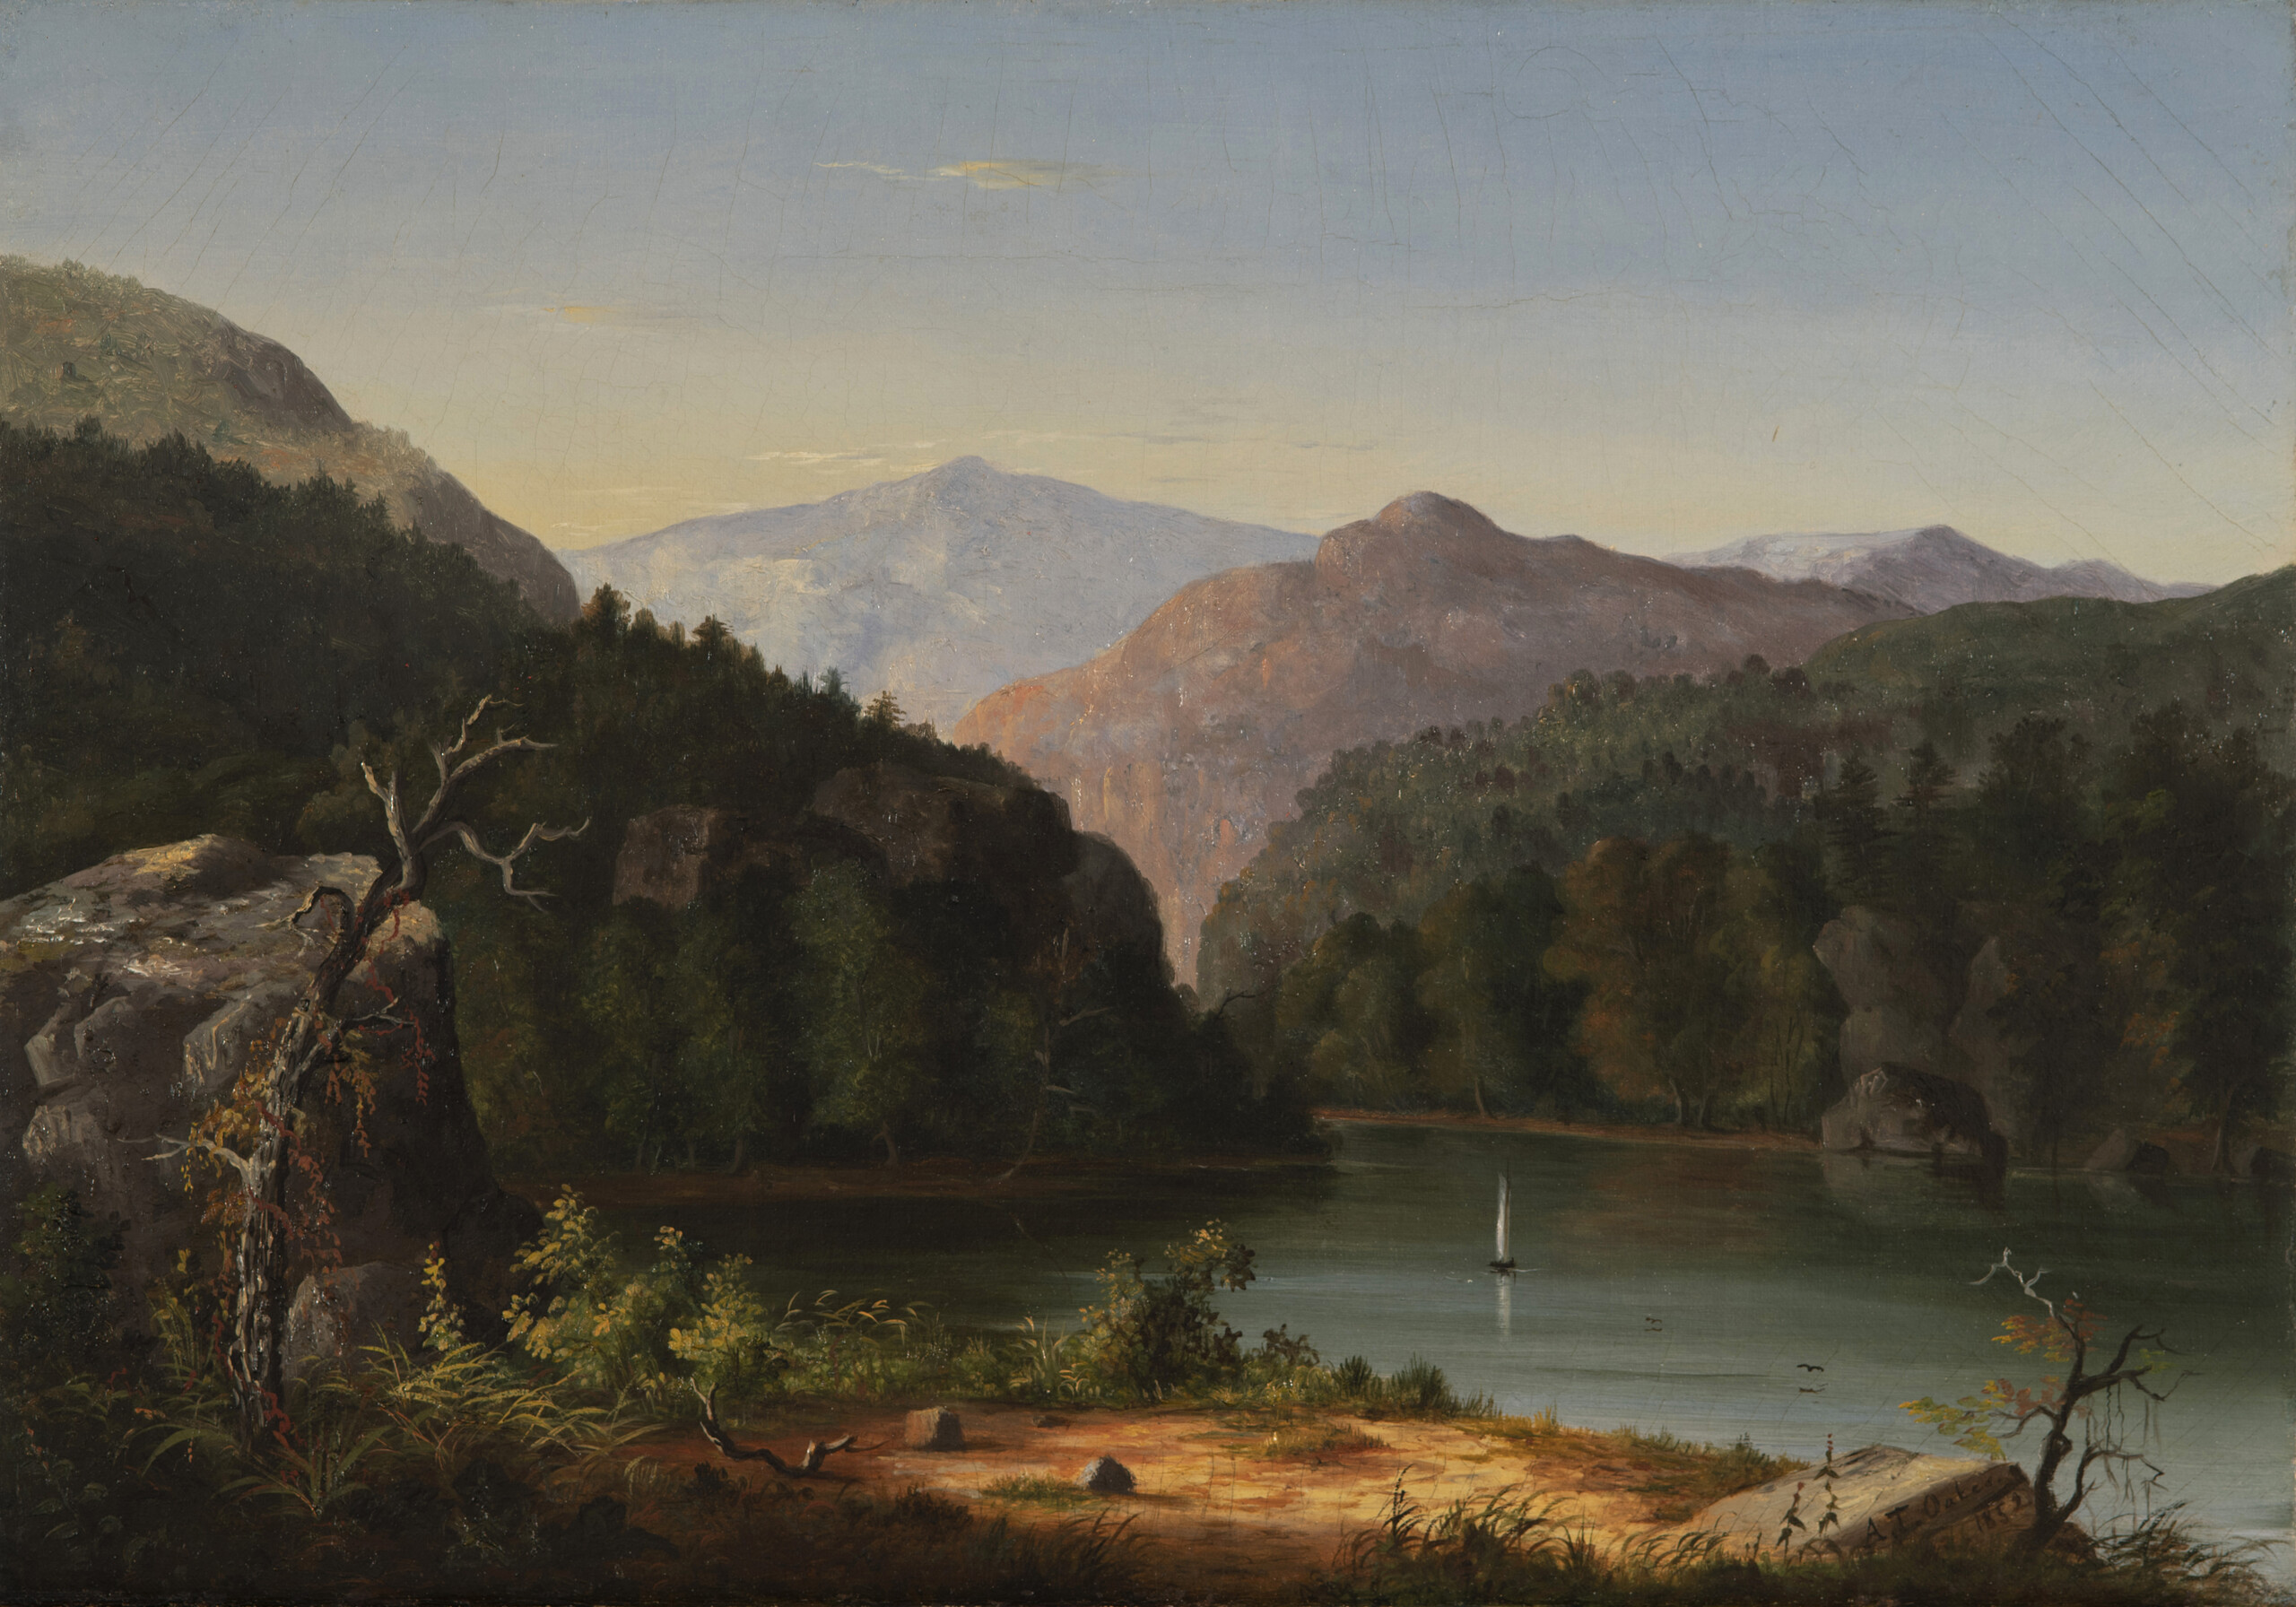 In this landscape painting, a glassy river cuts through forest and mountains, which rise in the distance against a clear blue sky. On the valley floor, the banks of the river show sand and foliage, while the forest is dense and dark.